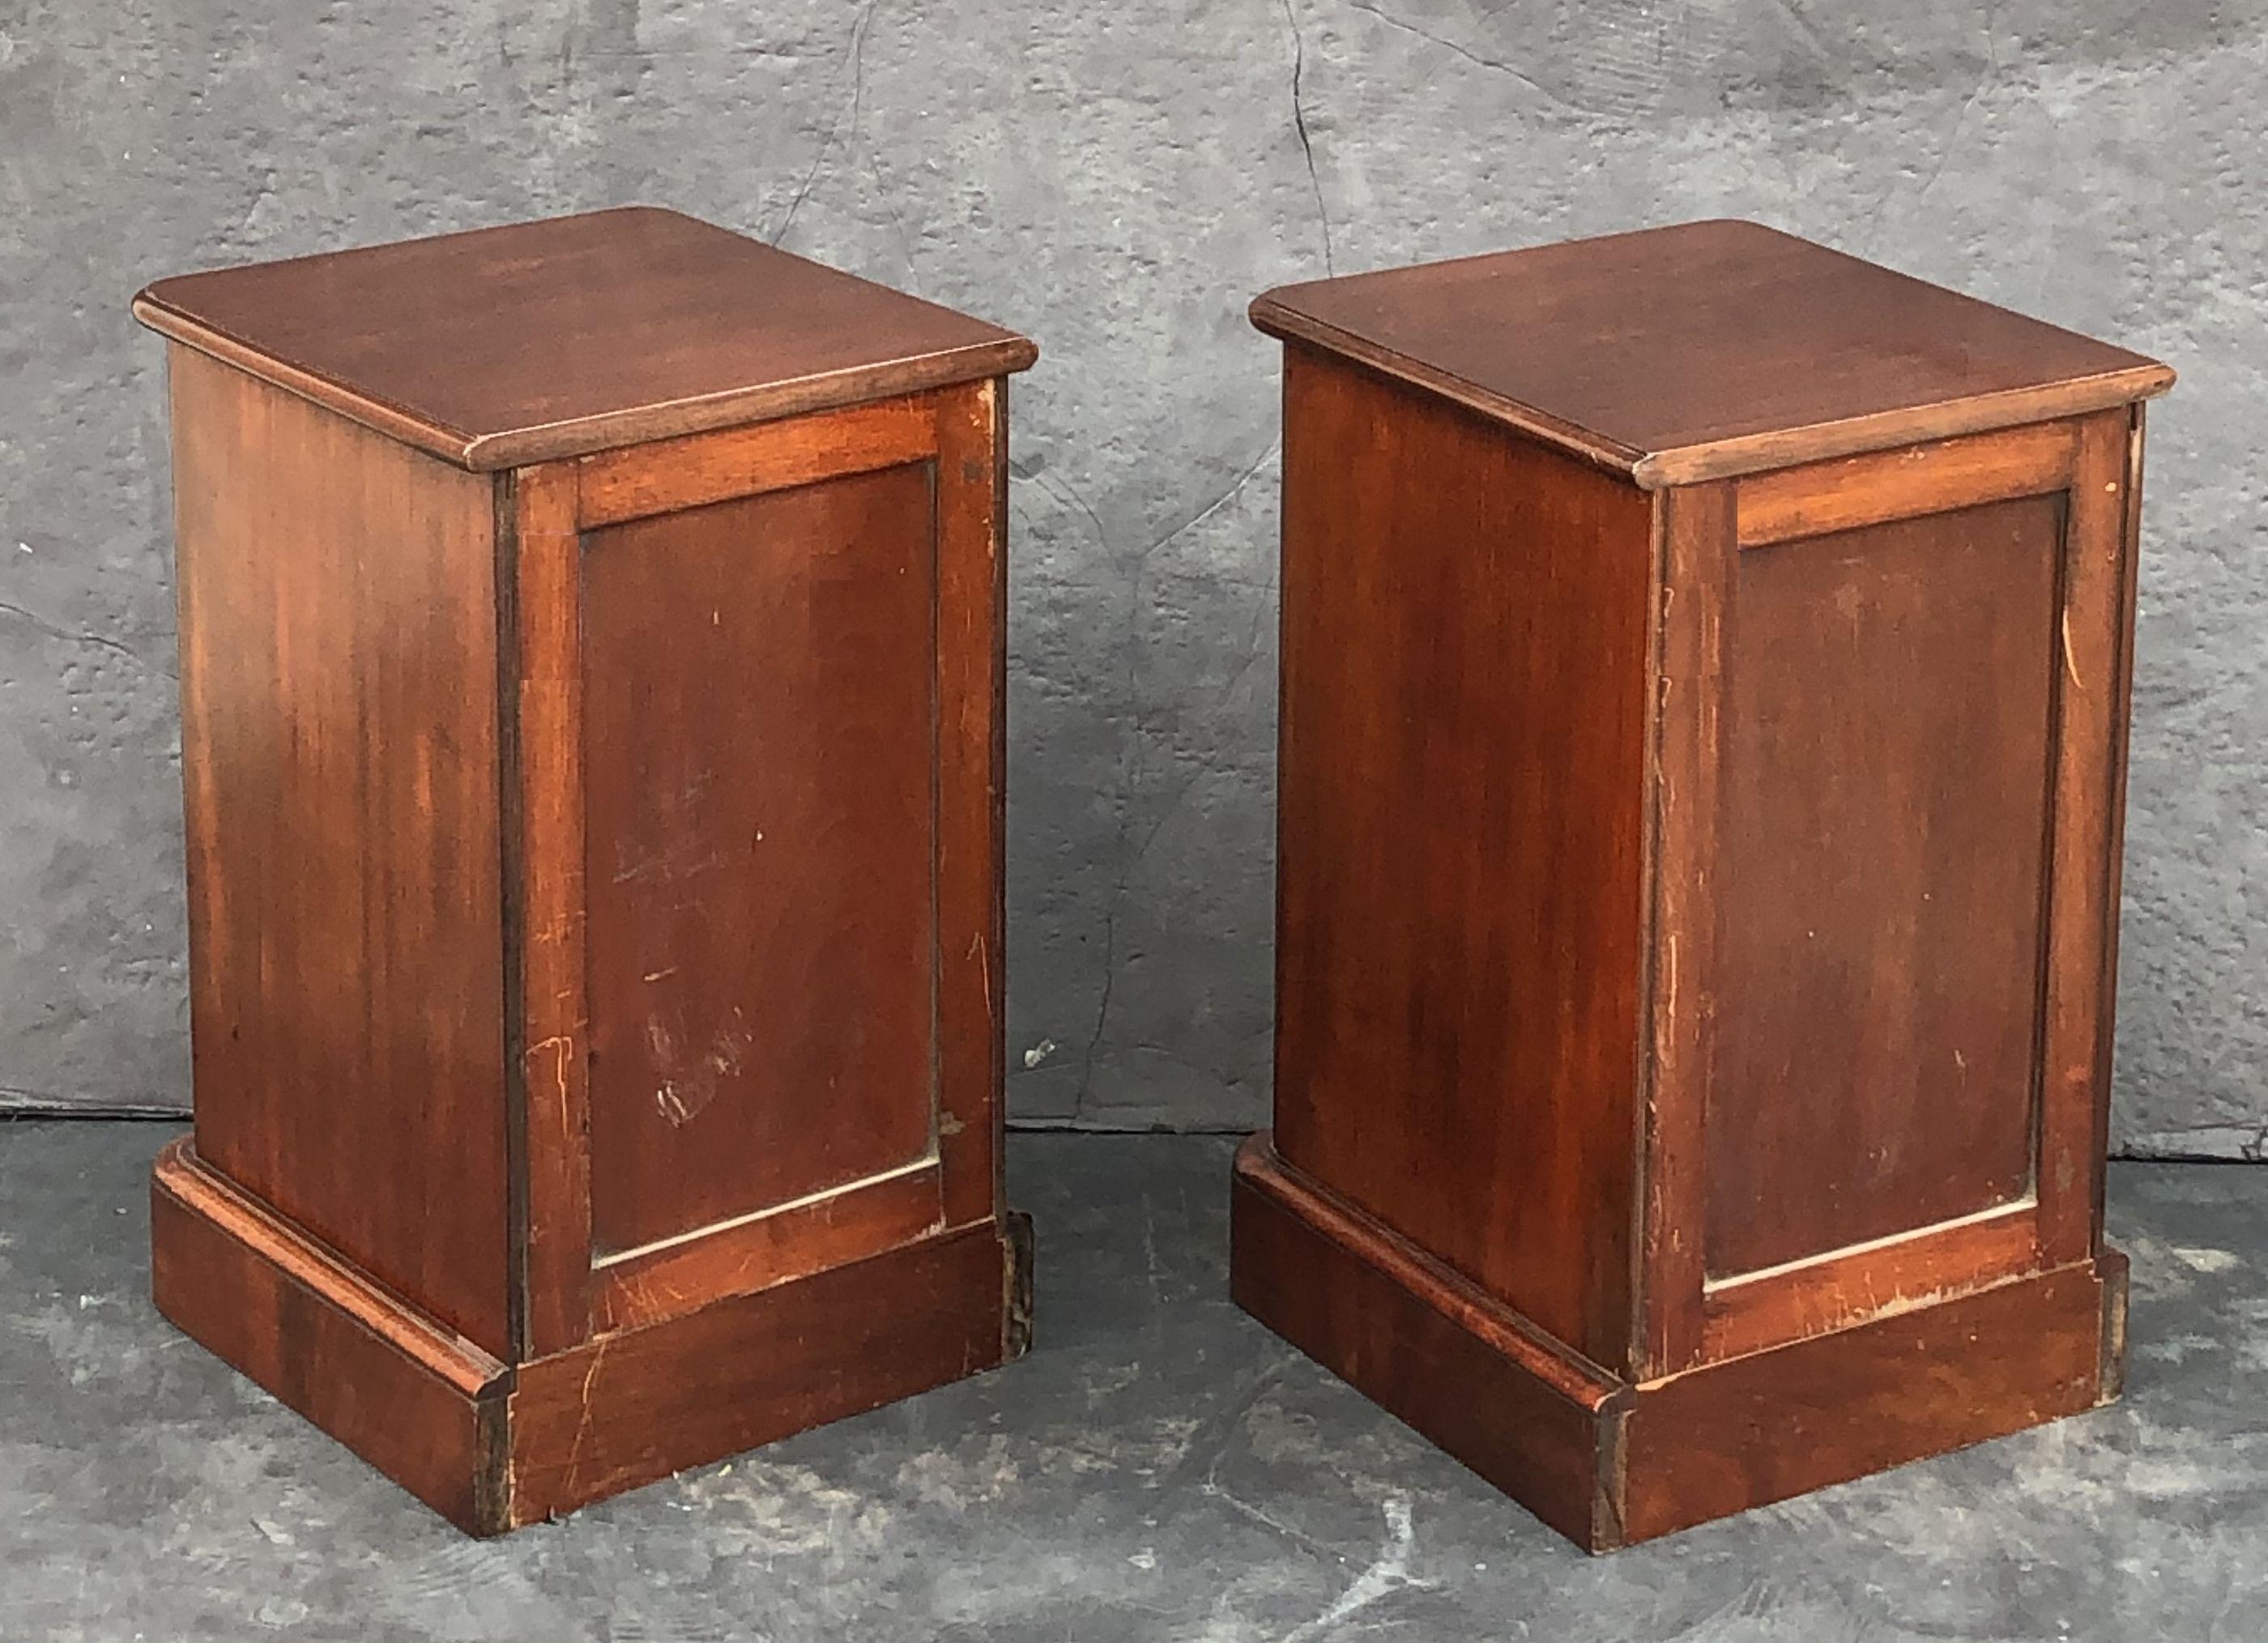 English Bedside Chests or Cabinet Nightstands of Mahogany, Priced as a Pair 14